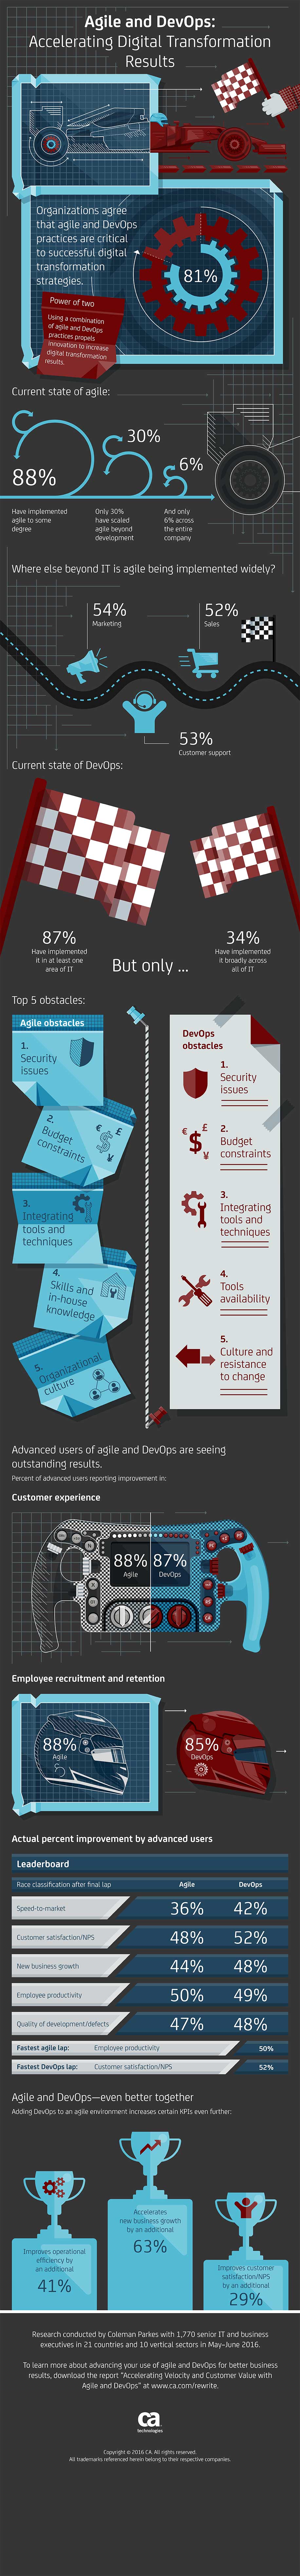 Agile-and-DevOps-Accelerating-Digital-Transformation-Results-Infographic